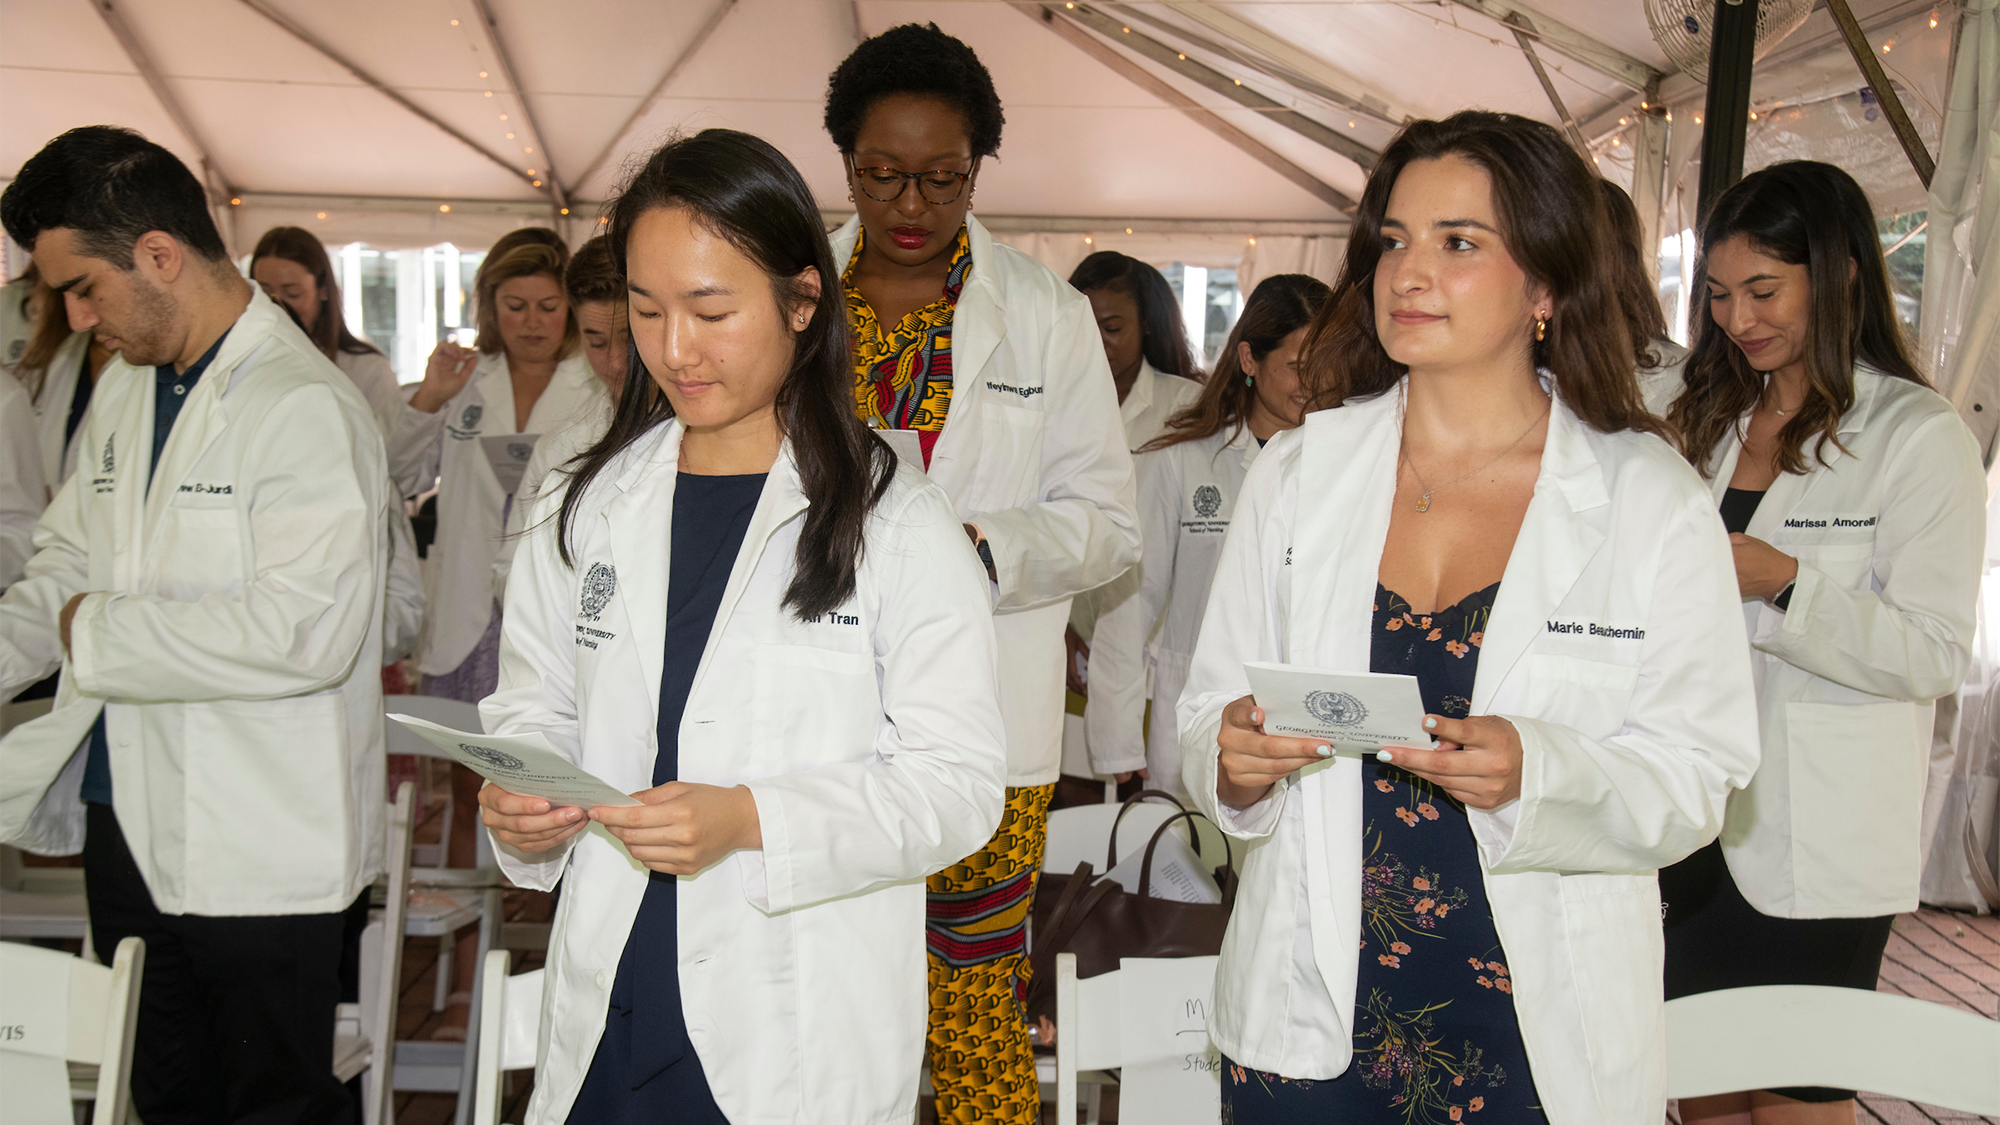 Student recite the oath at their White Coat ceremony